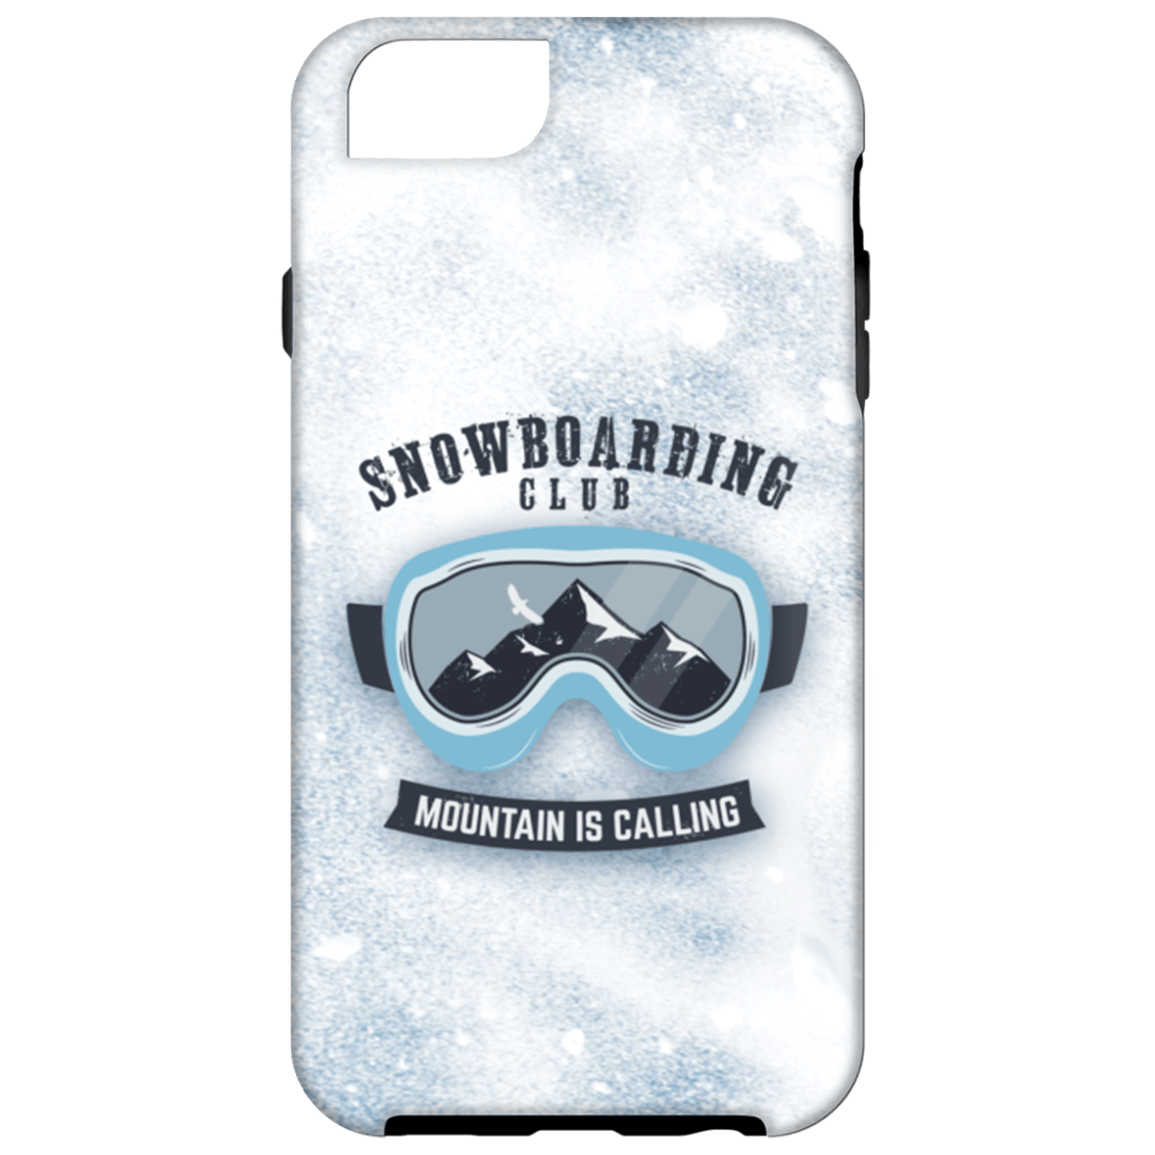 Snowboarding Club Mountain Is Calling Phone Cases - Powderaddicts